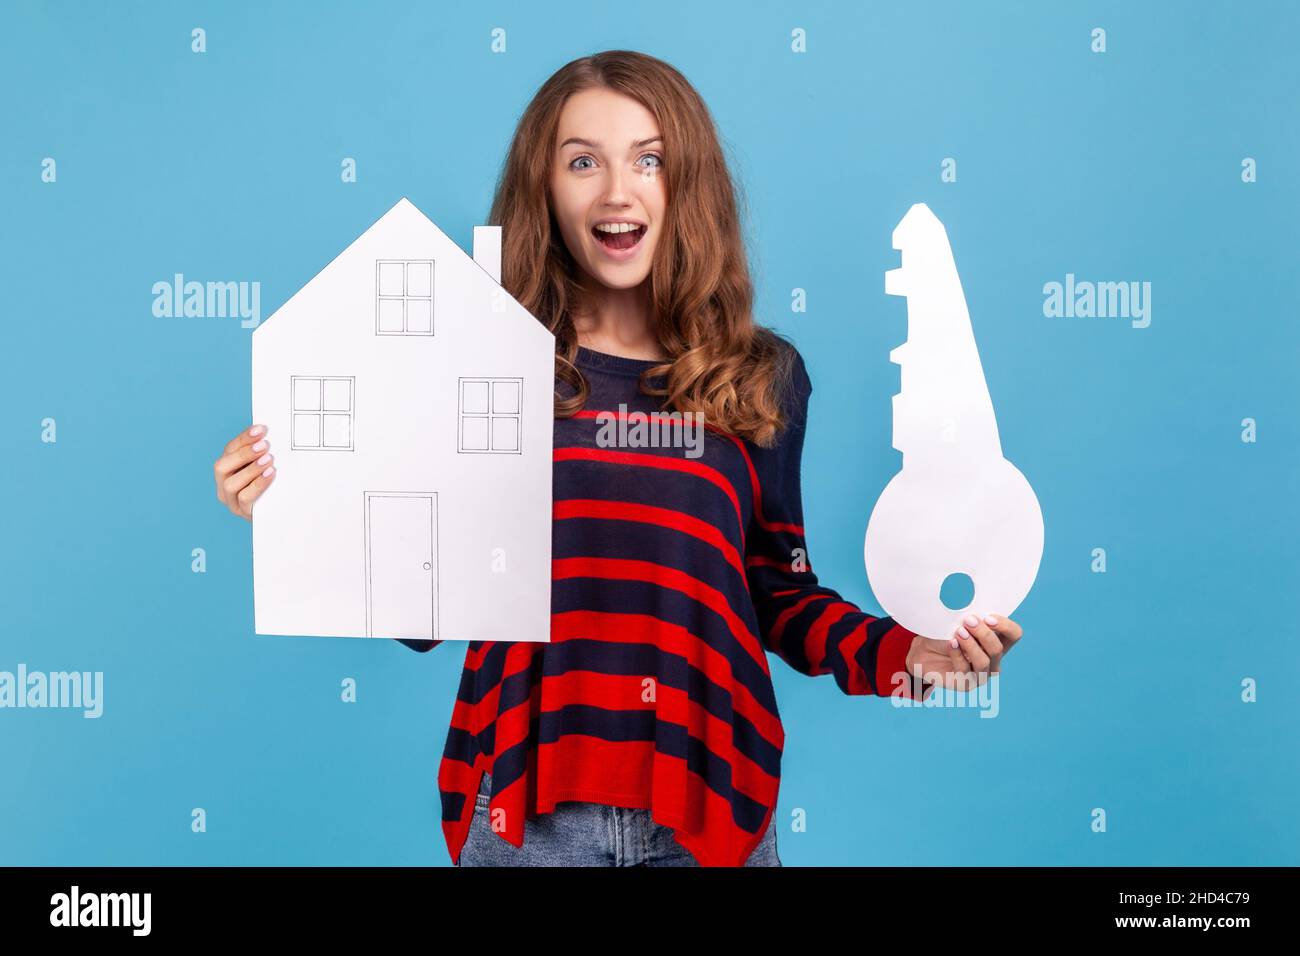 Surprised astonished woman wearing striped casual style sweater, holding paper house and big key, real estate purchase, rental services, mortgage. Indoor studio shot isolated on blue background. Stock Photo